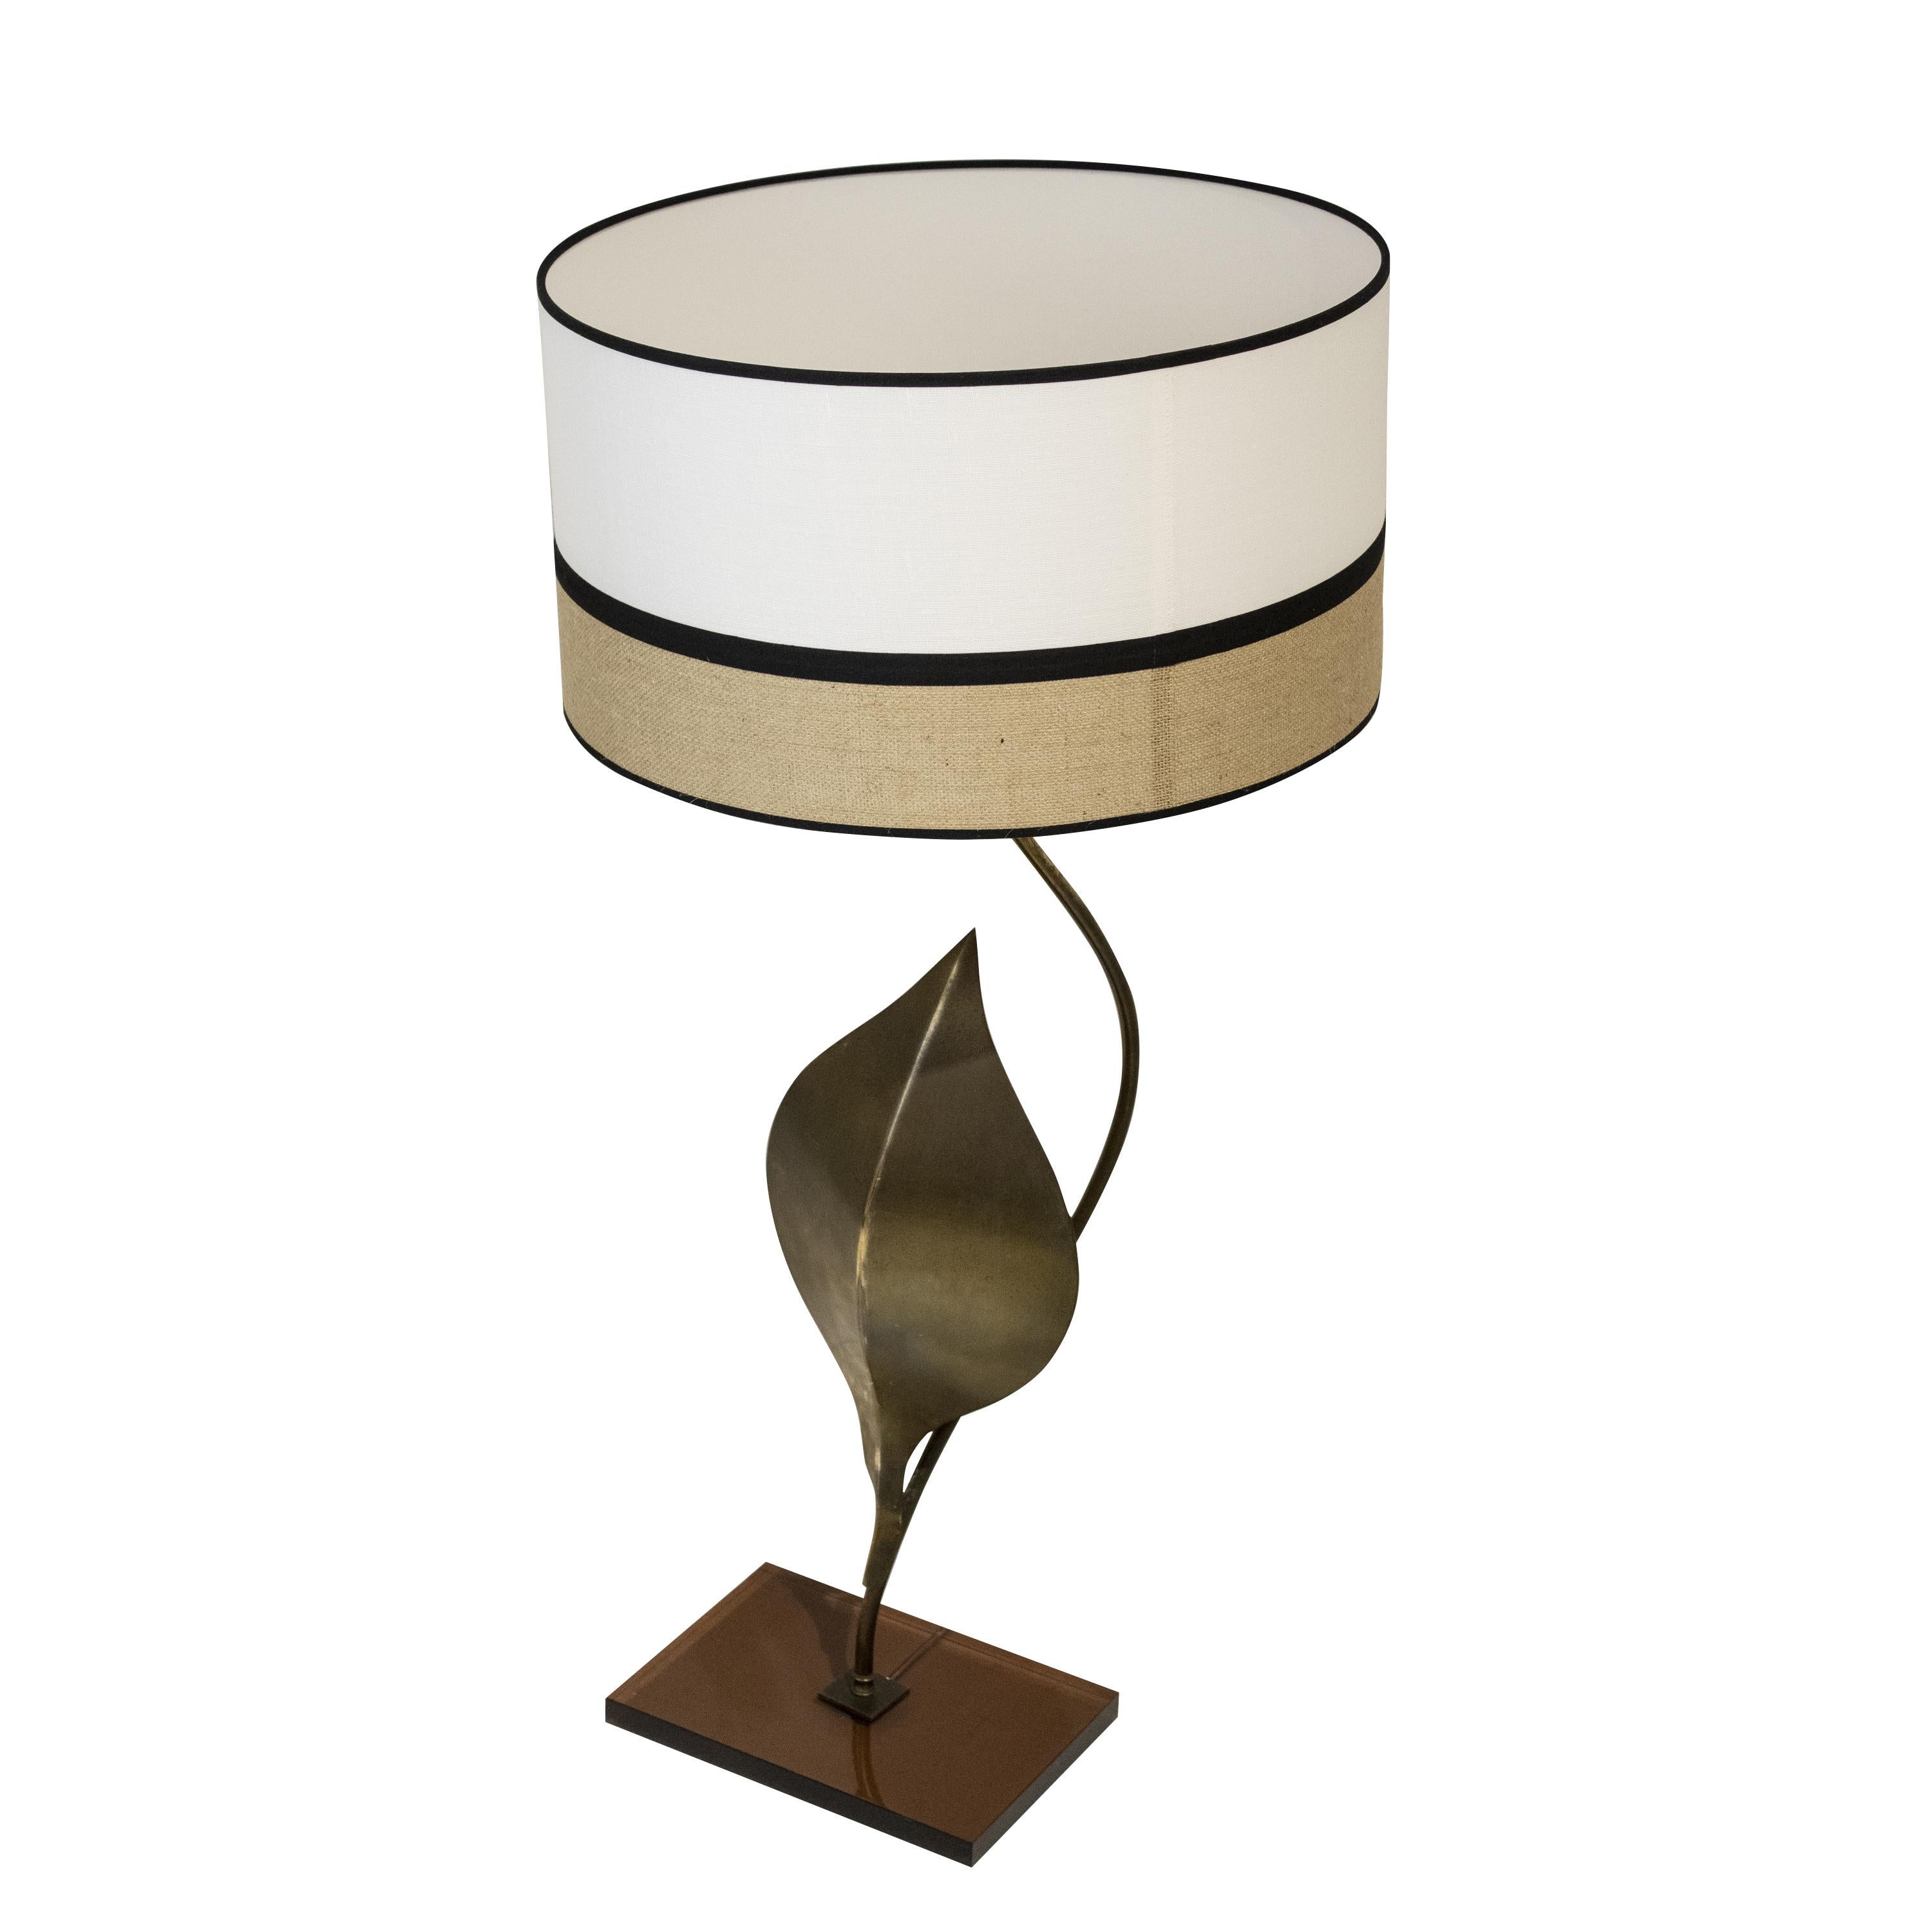 A mid-century France table lamp attributed to Maison Bagues composed of a foot made of curved chromed steel and a leaf decoration. The base is made of semitransparent methacrylate.
The Lampshade is made of tricolor in wicker and linen material, in